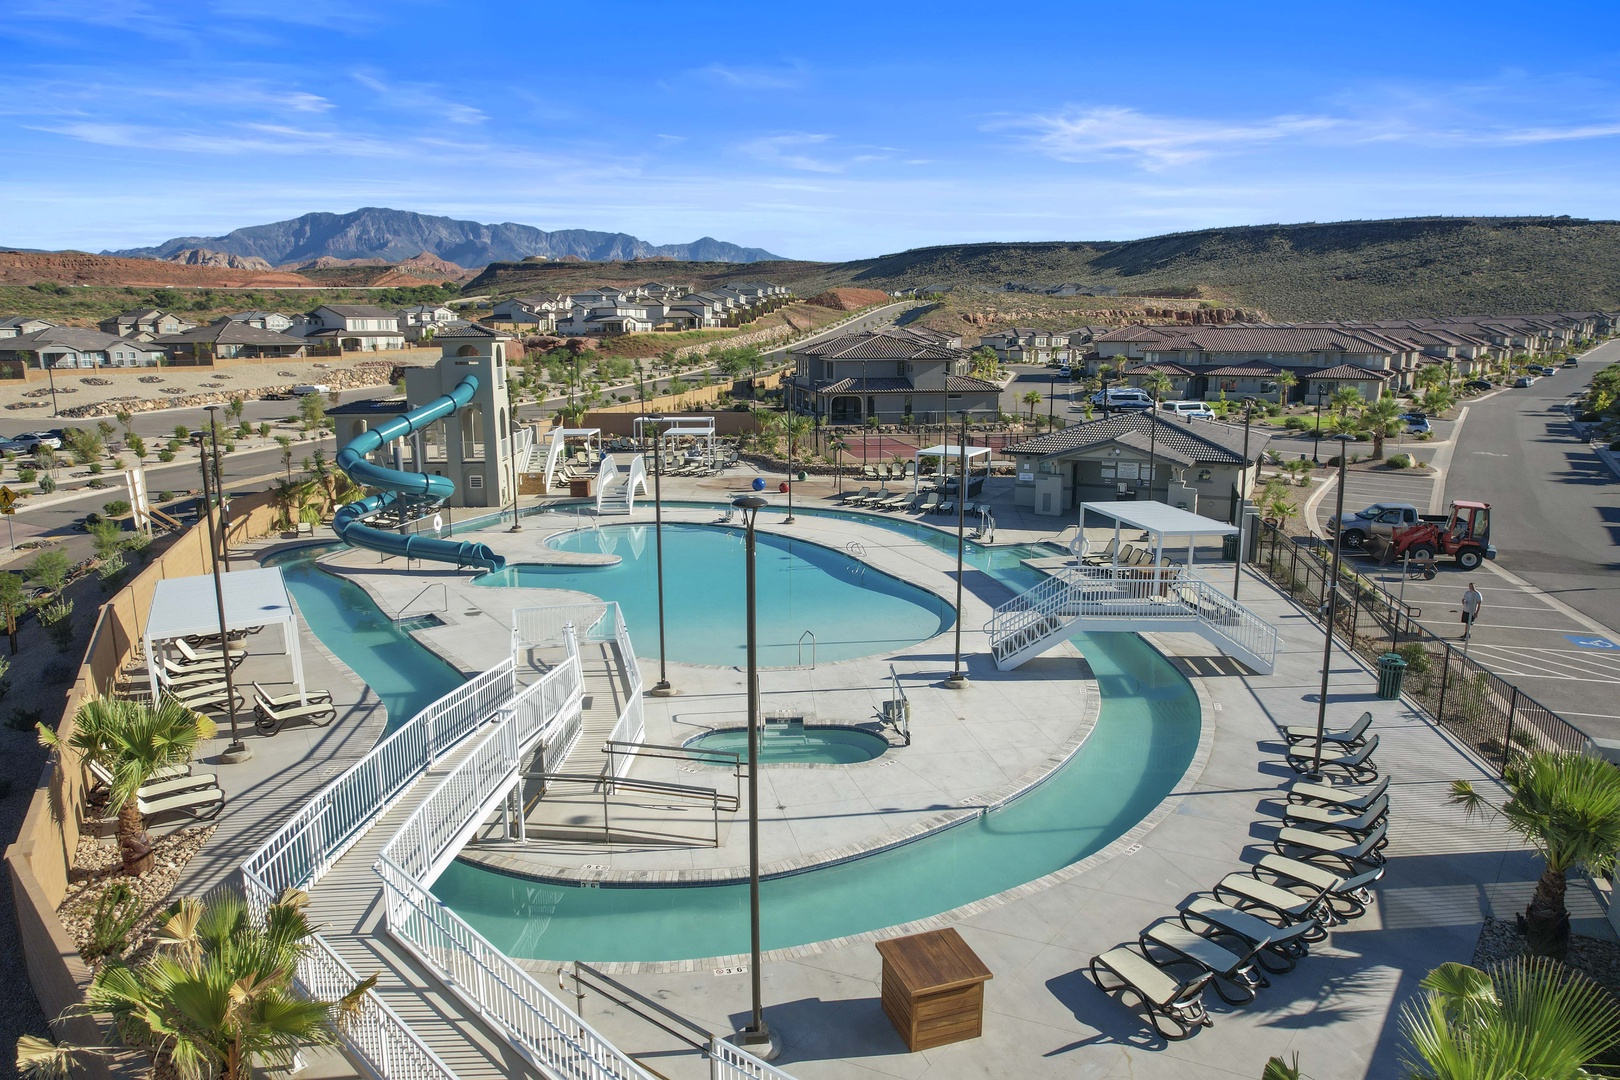 New communal waterpark includes a waterslide, lazy river, splash pad, and more!